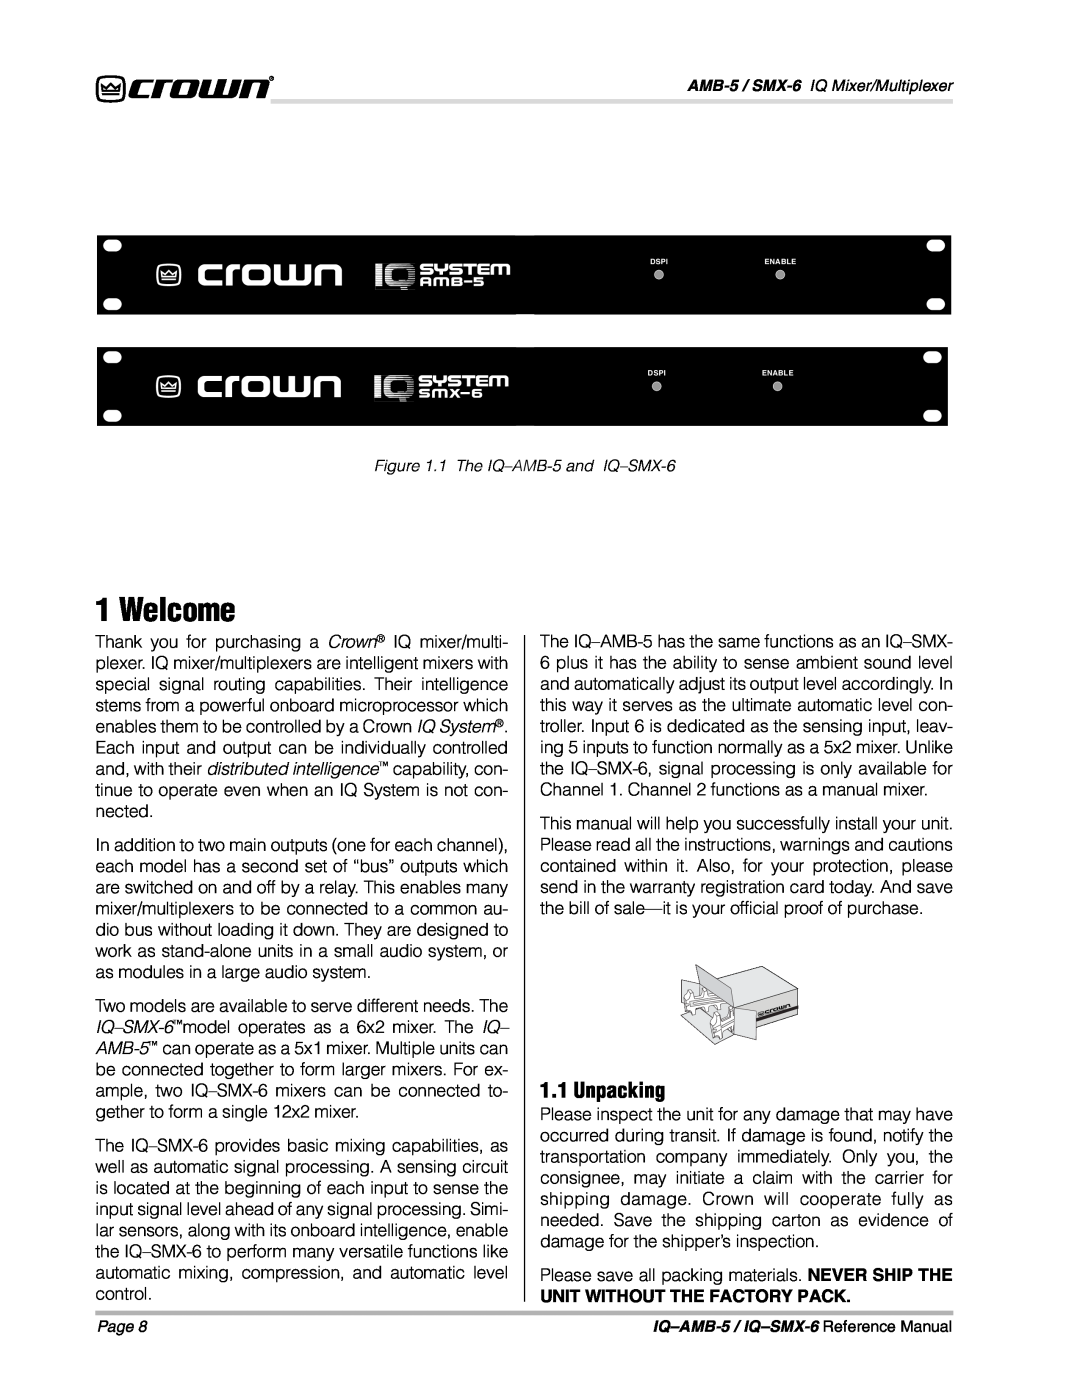 Crown IQSMX-6, IQAMB-5 manual Welcome, Unpacking, Unit Without The Factory Pack 